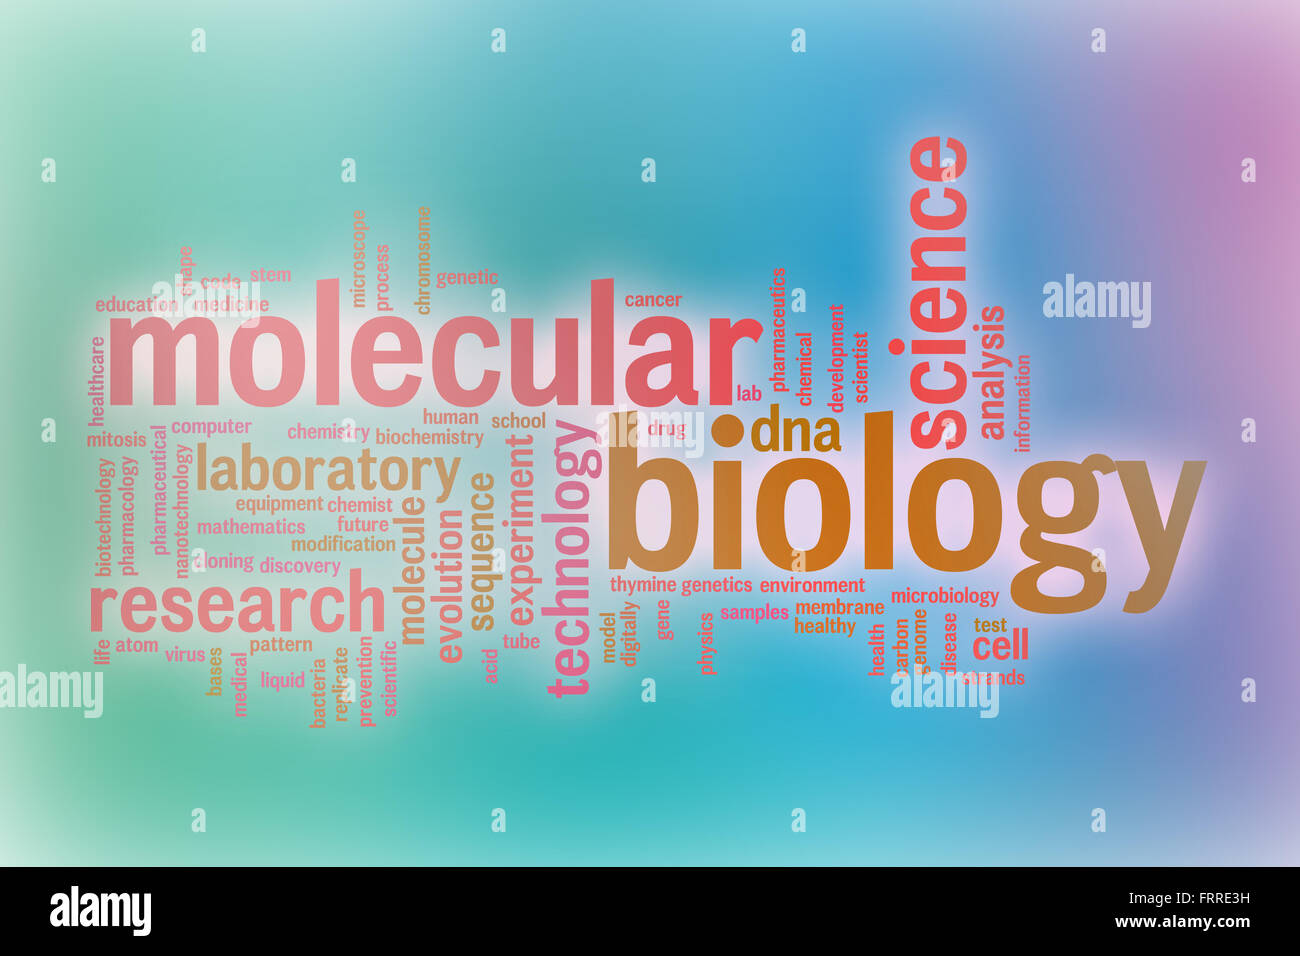 Molecular biology word cloud concept with abstract background Stock Photo